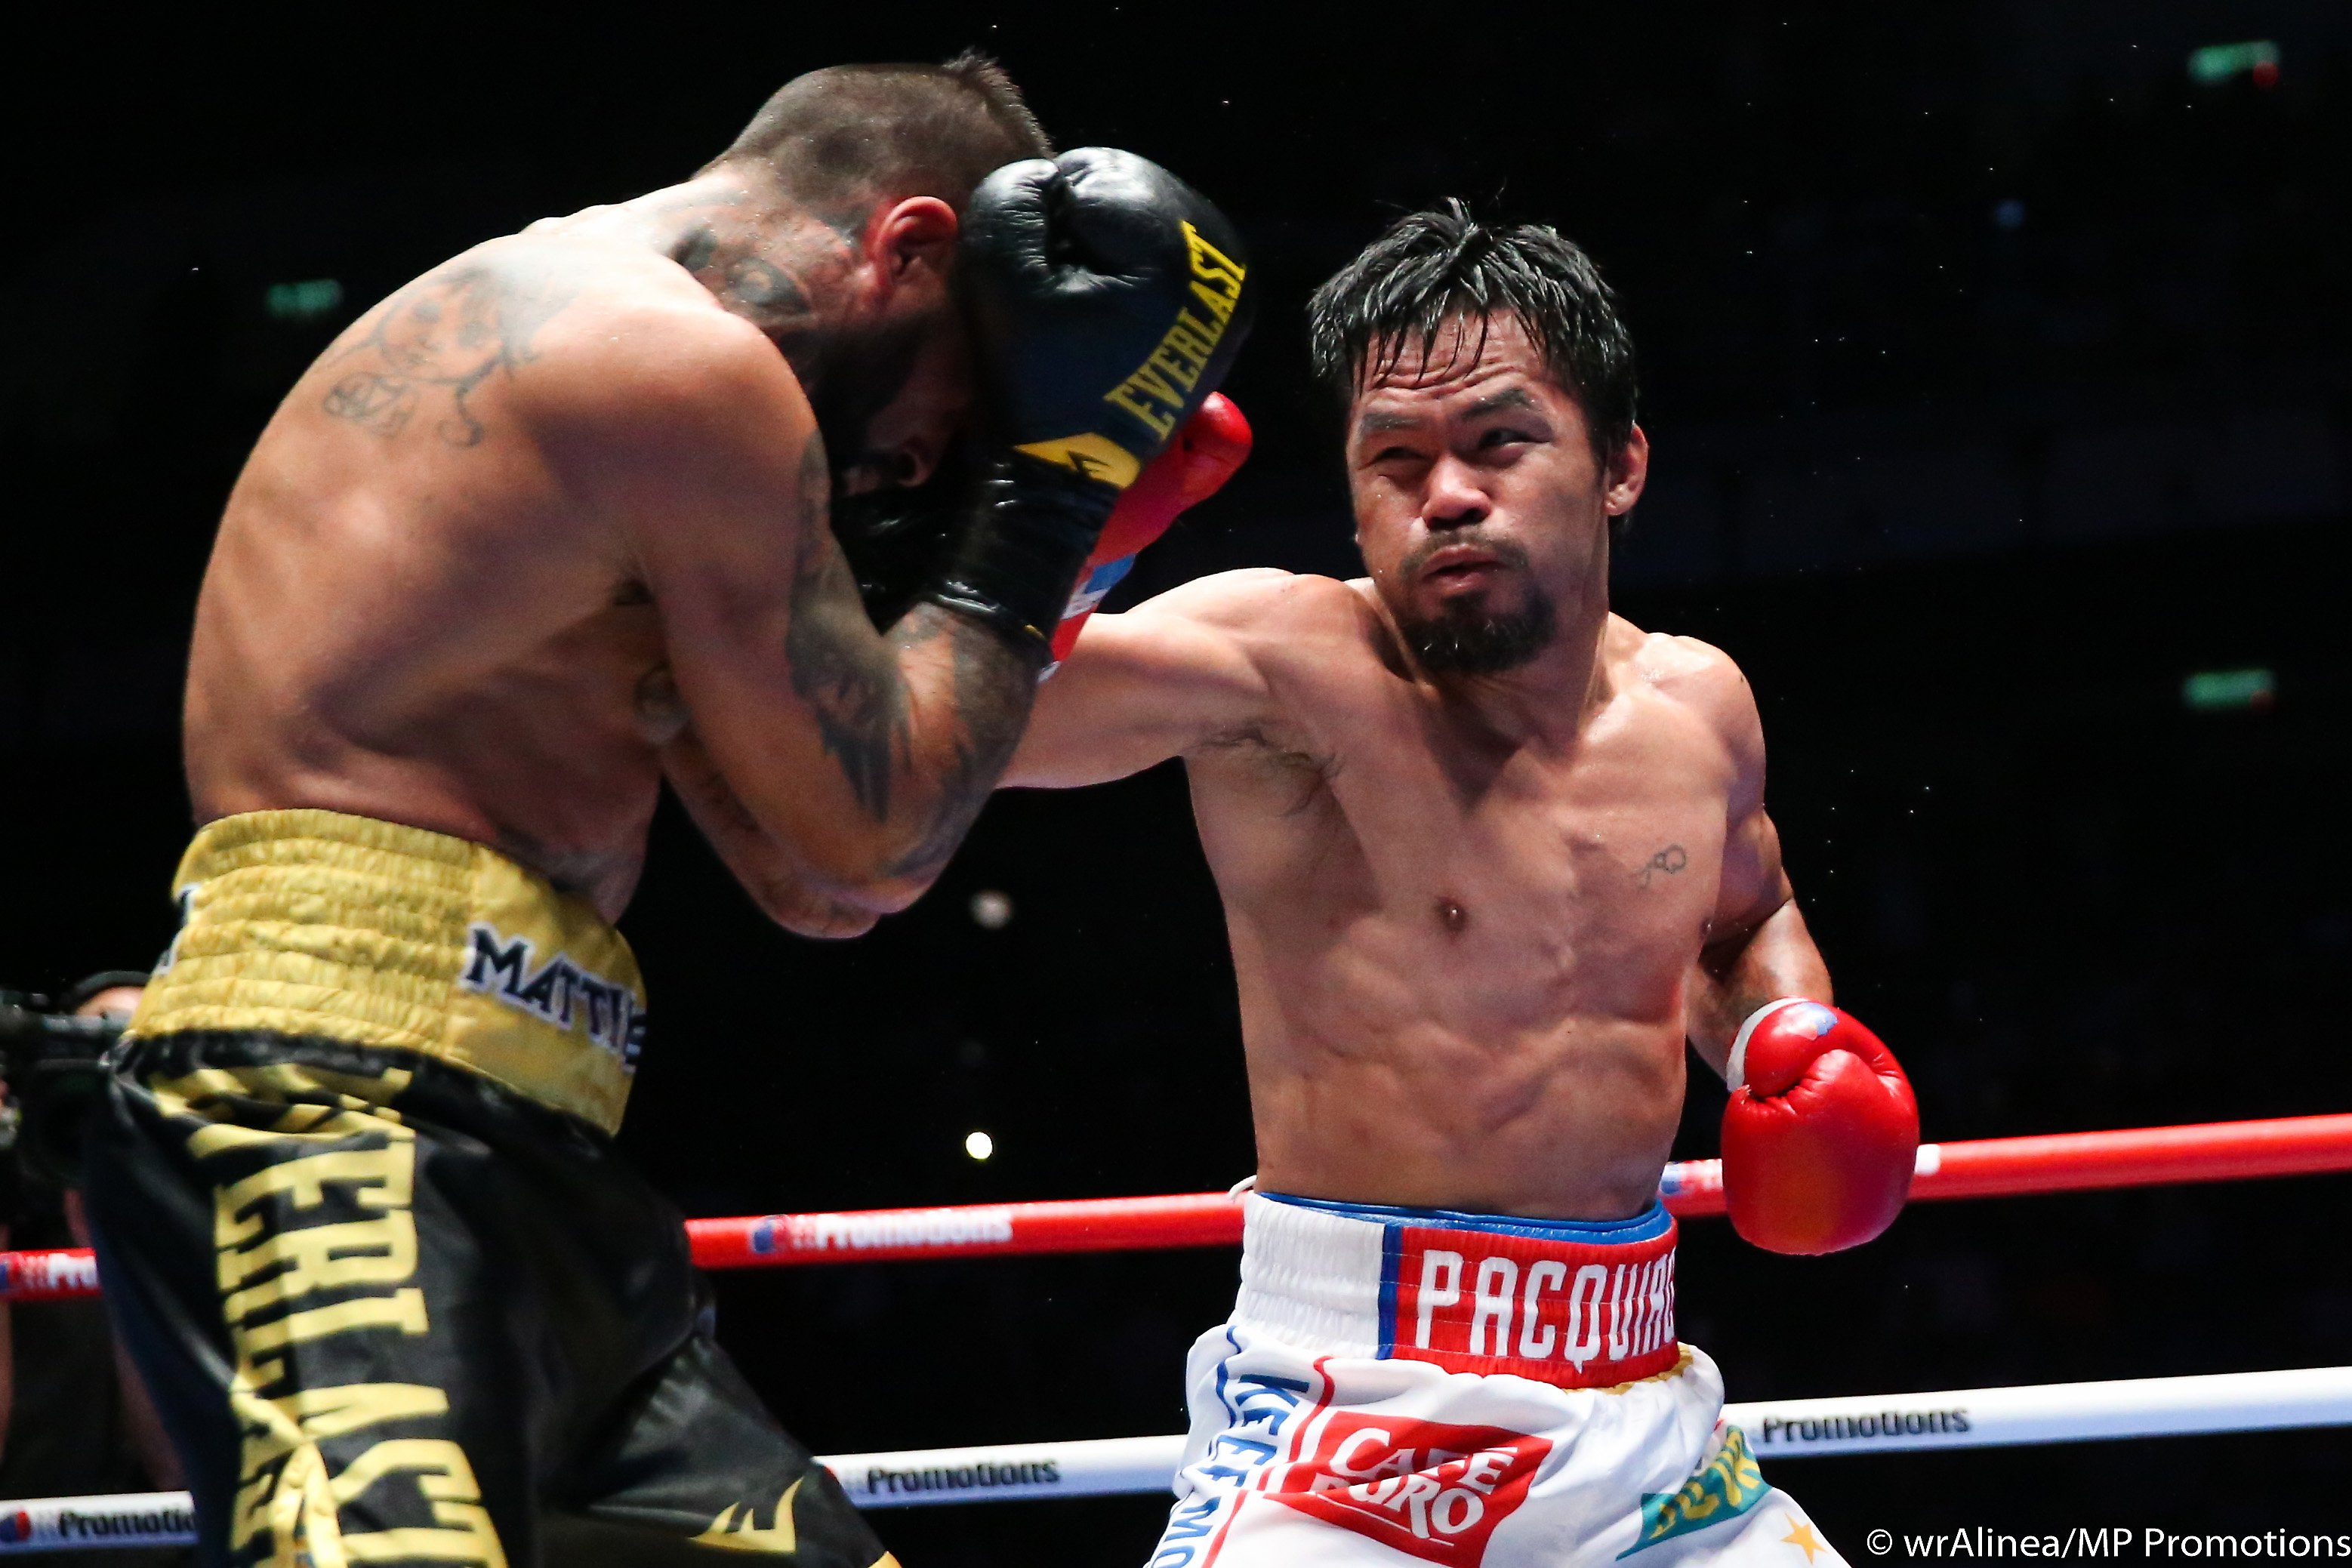 Manny Pacquiao (right) vs. Lucas Matthysse. Photo credit: WR Alinea/MP Promotions